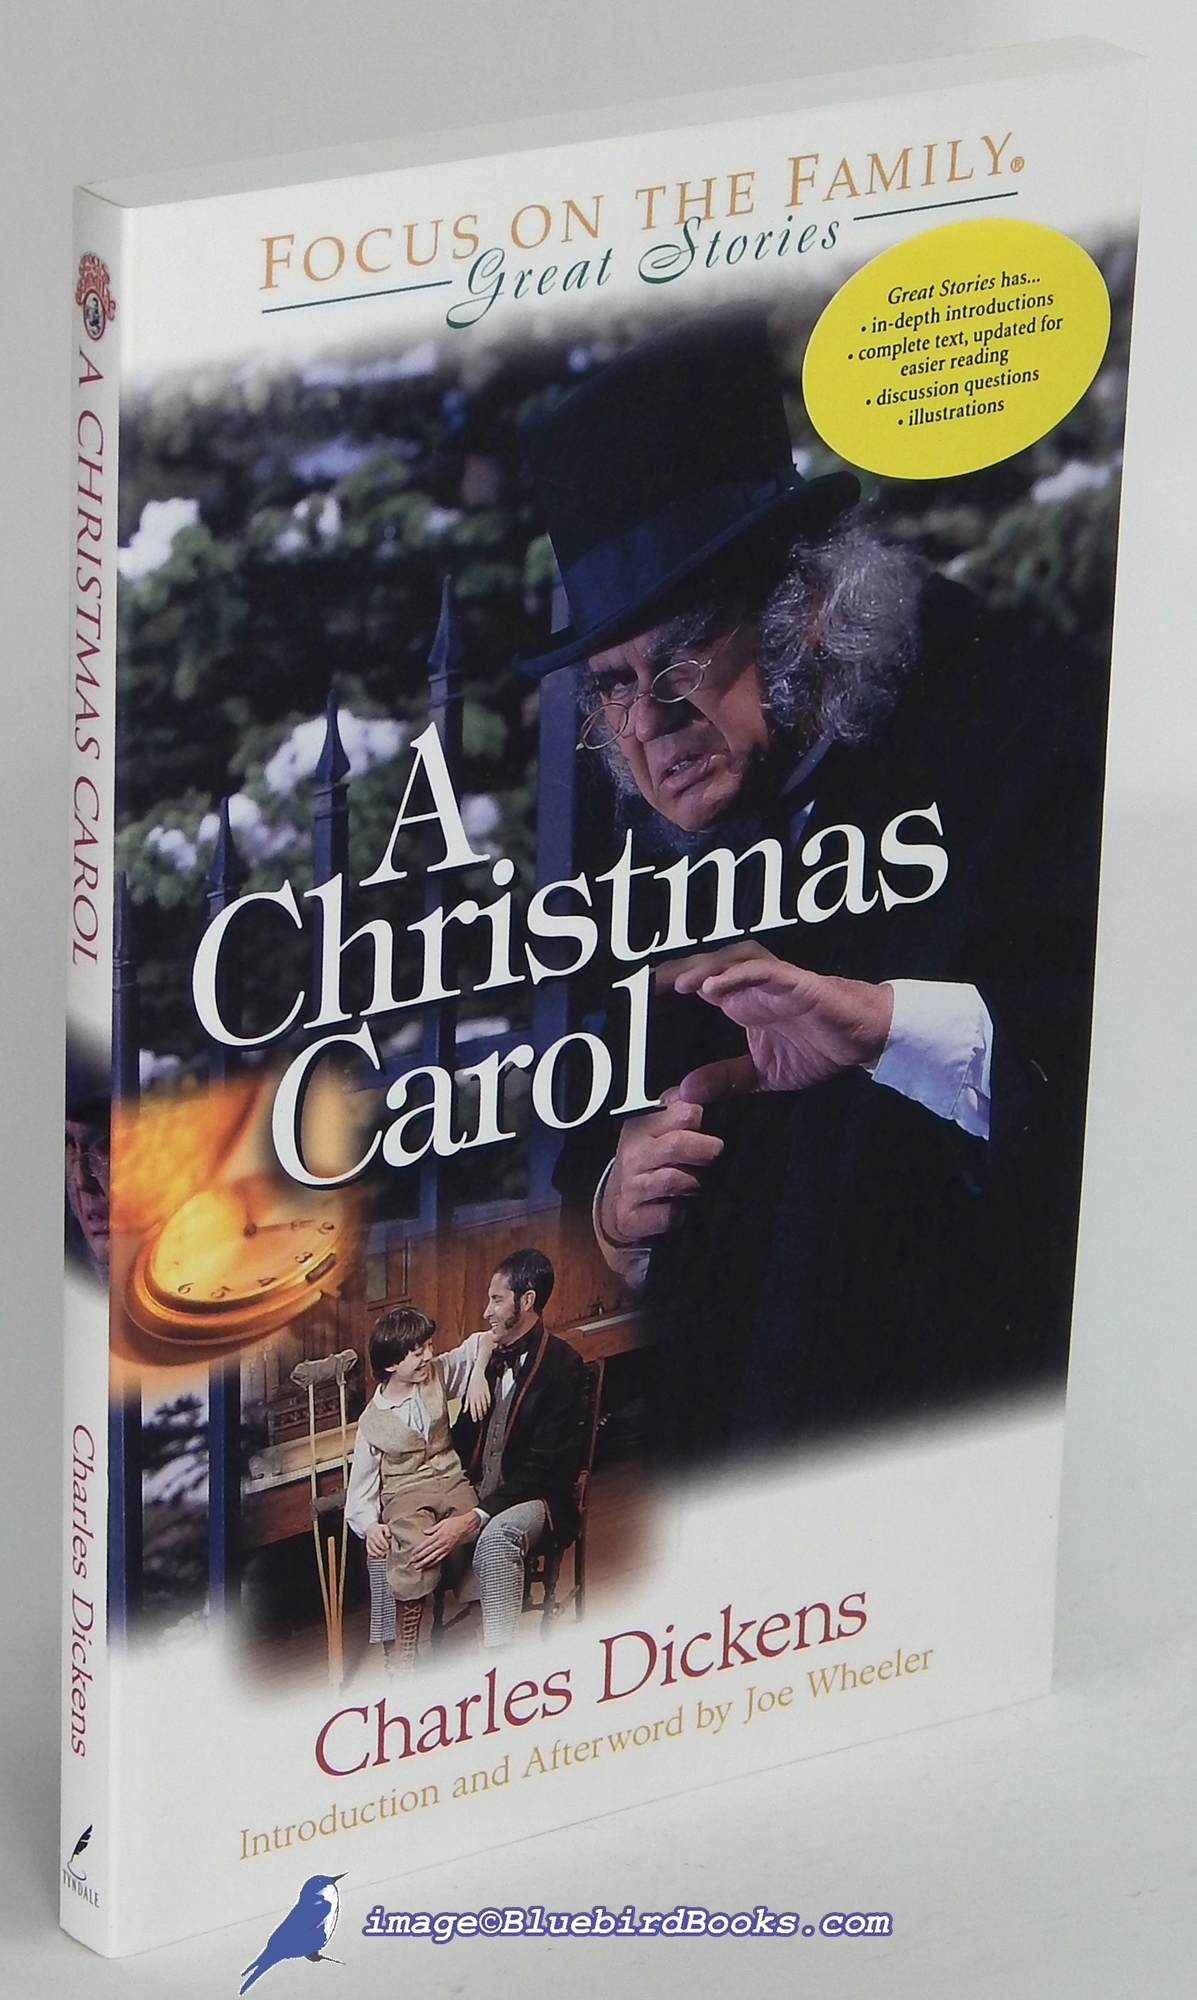 DICKENS, CHARLES (AUTHOR); WHEELER, JOE (INTRODUCTION AND AFTERWORD) - A Christmas Carol (Focus on the Family's Great Stories Series)